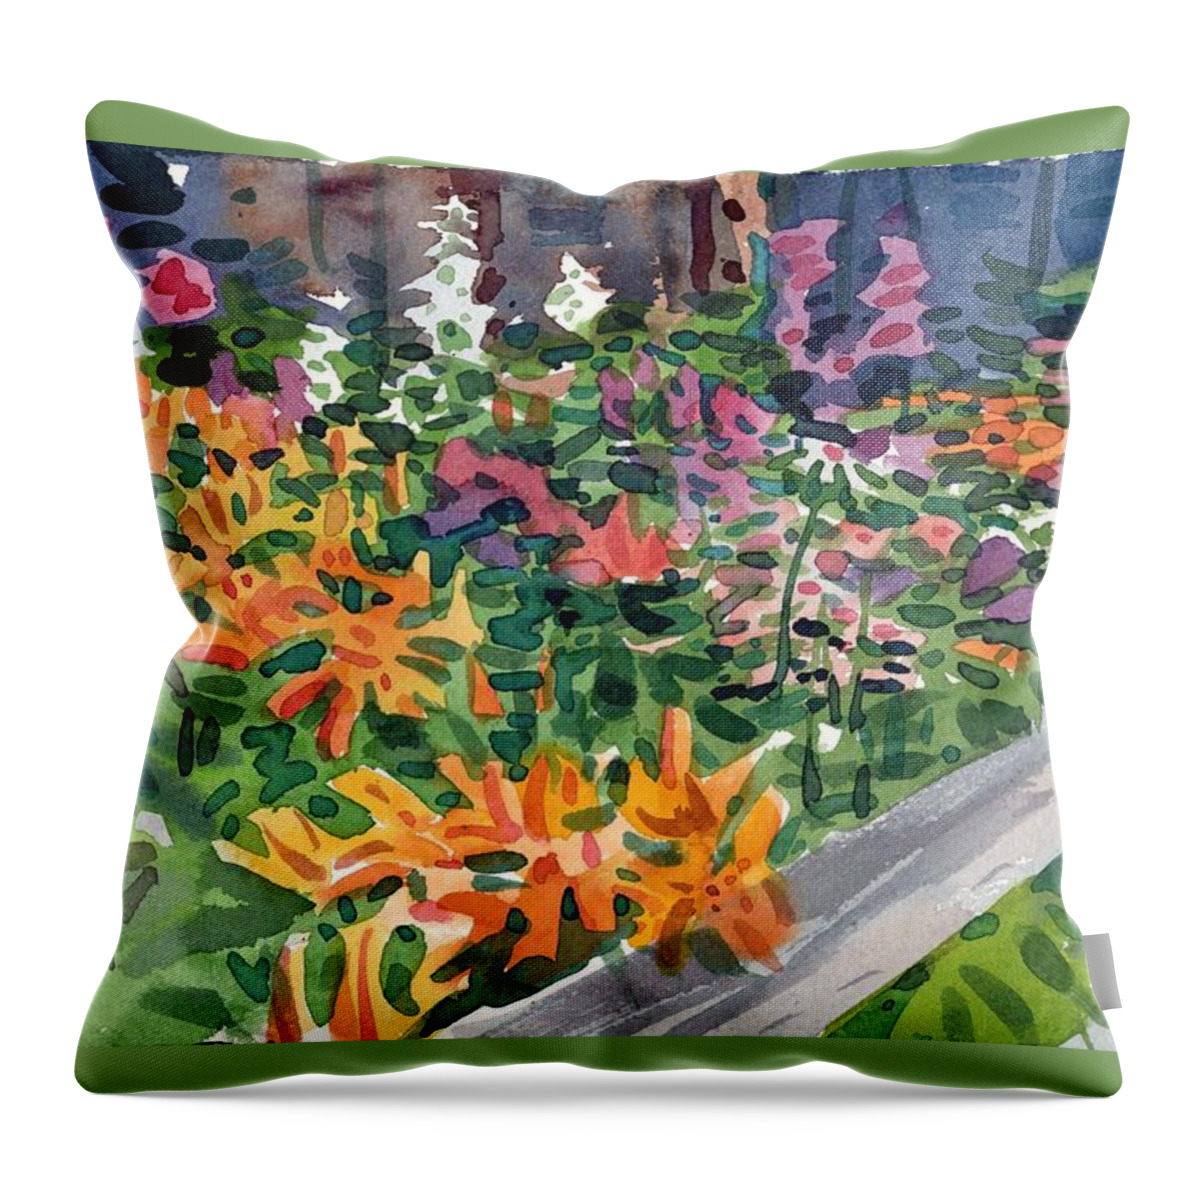 Flowers Throw Pillow featuring the painting Flower Garden by Donald Maier